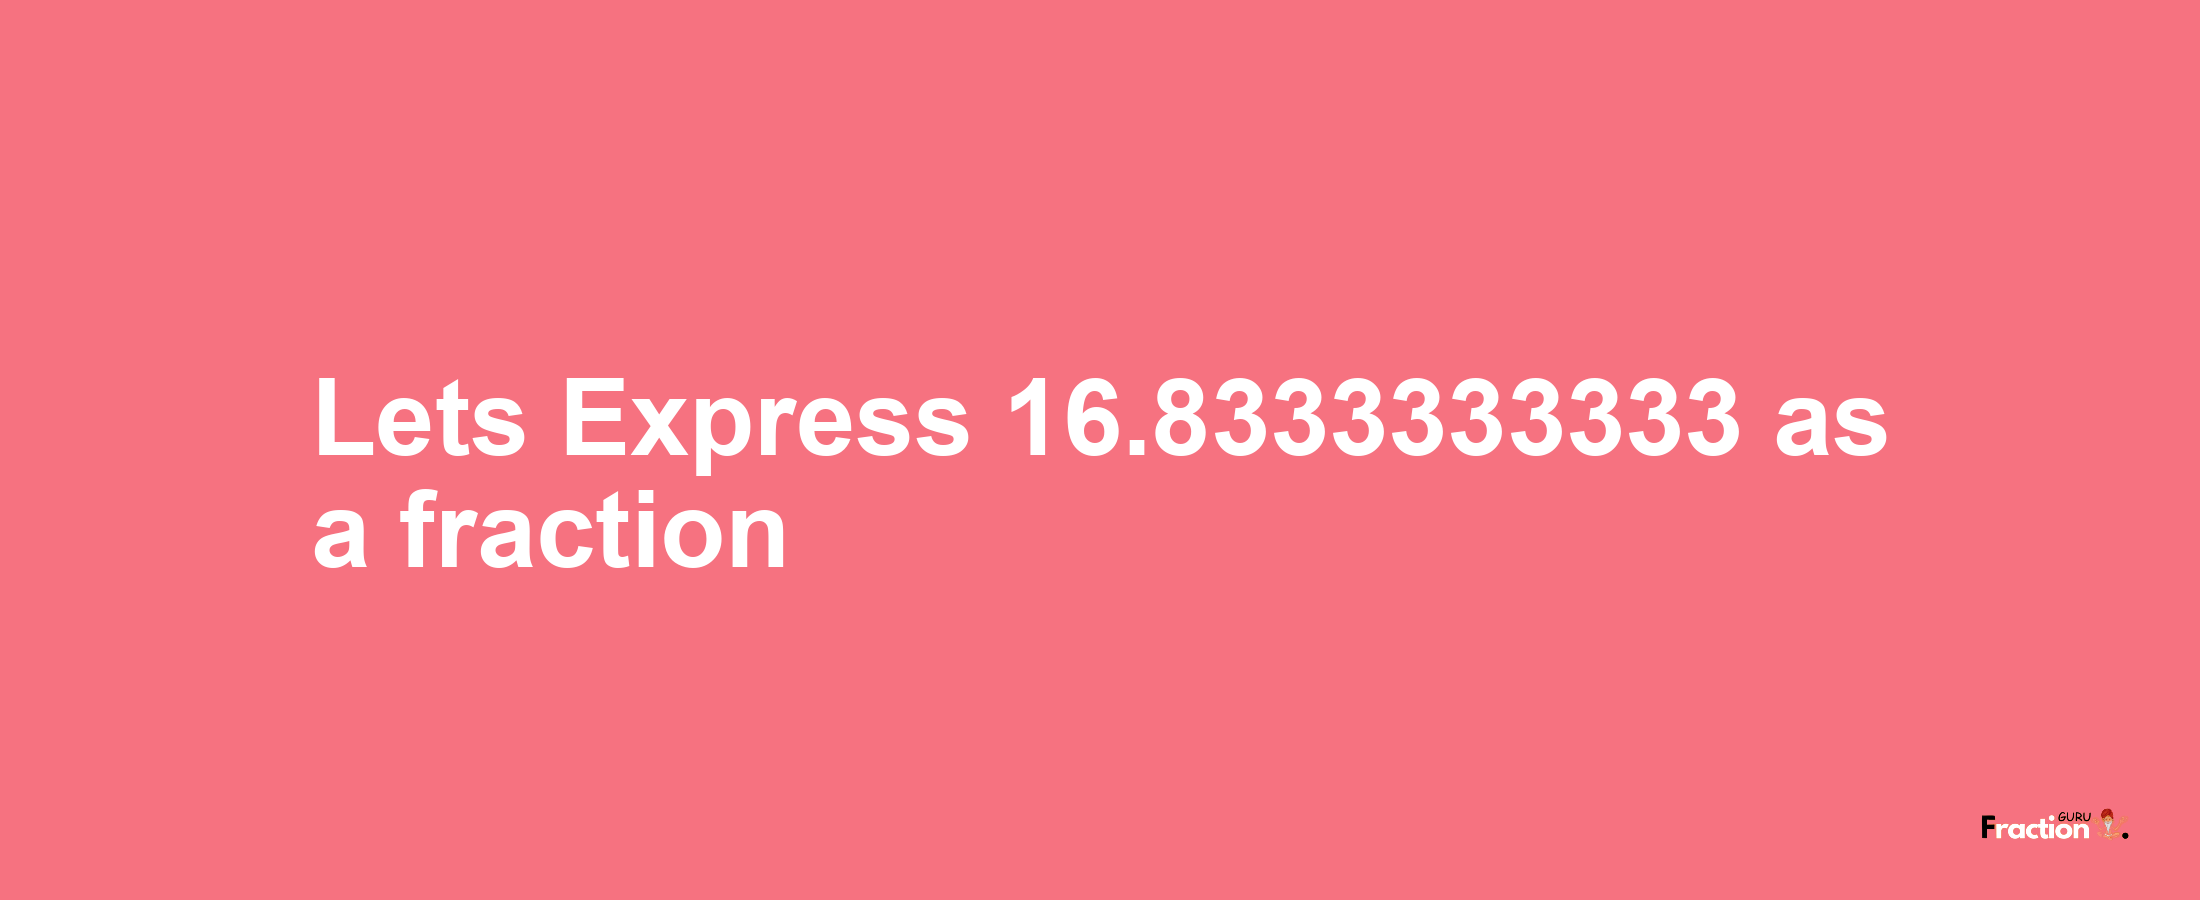 Lets Express 16.8333333333 as afraction